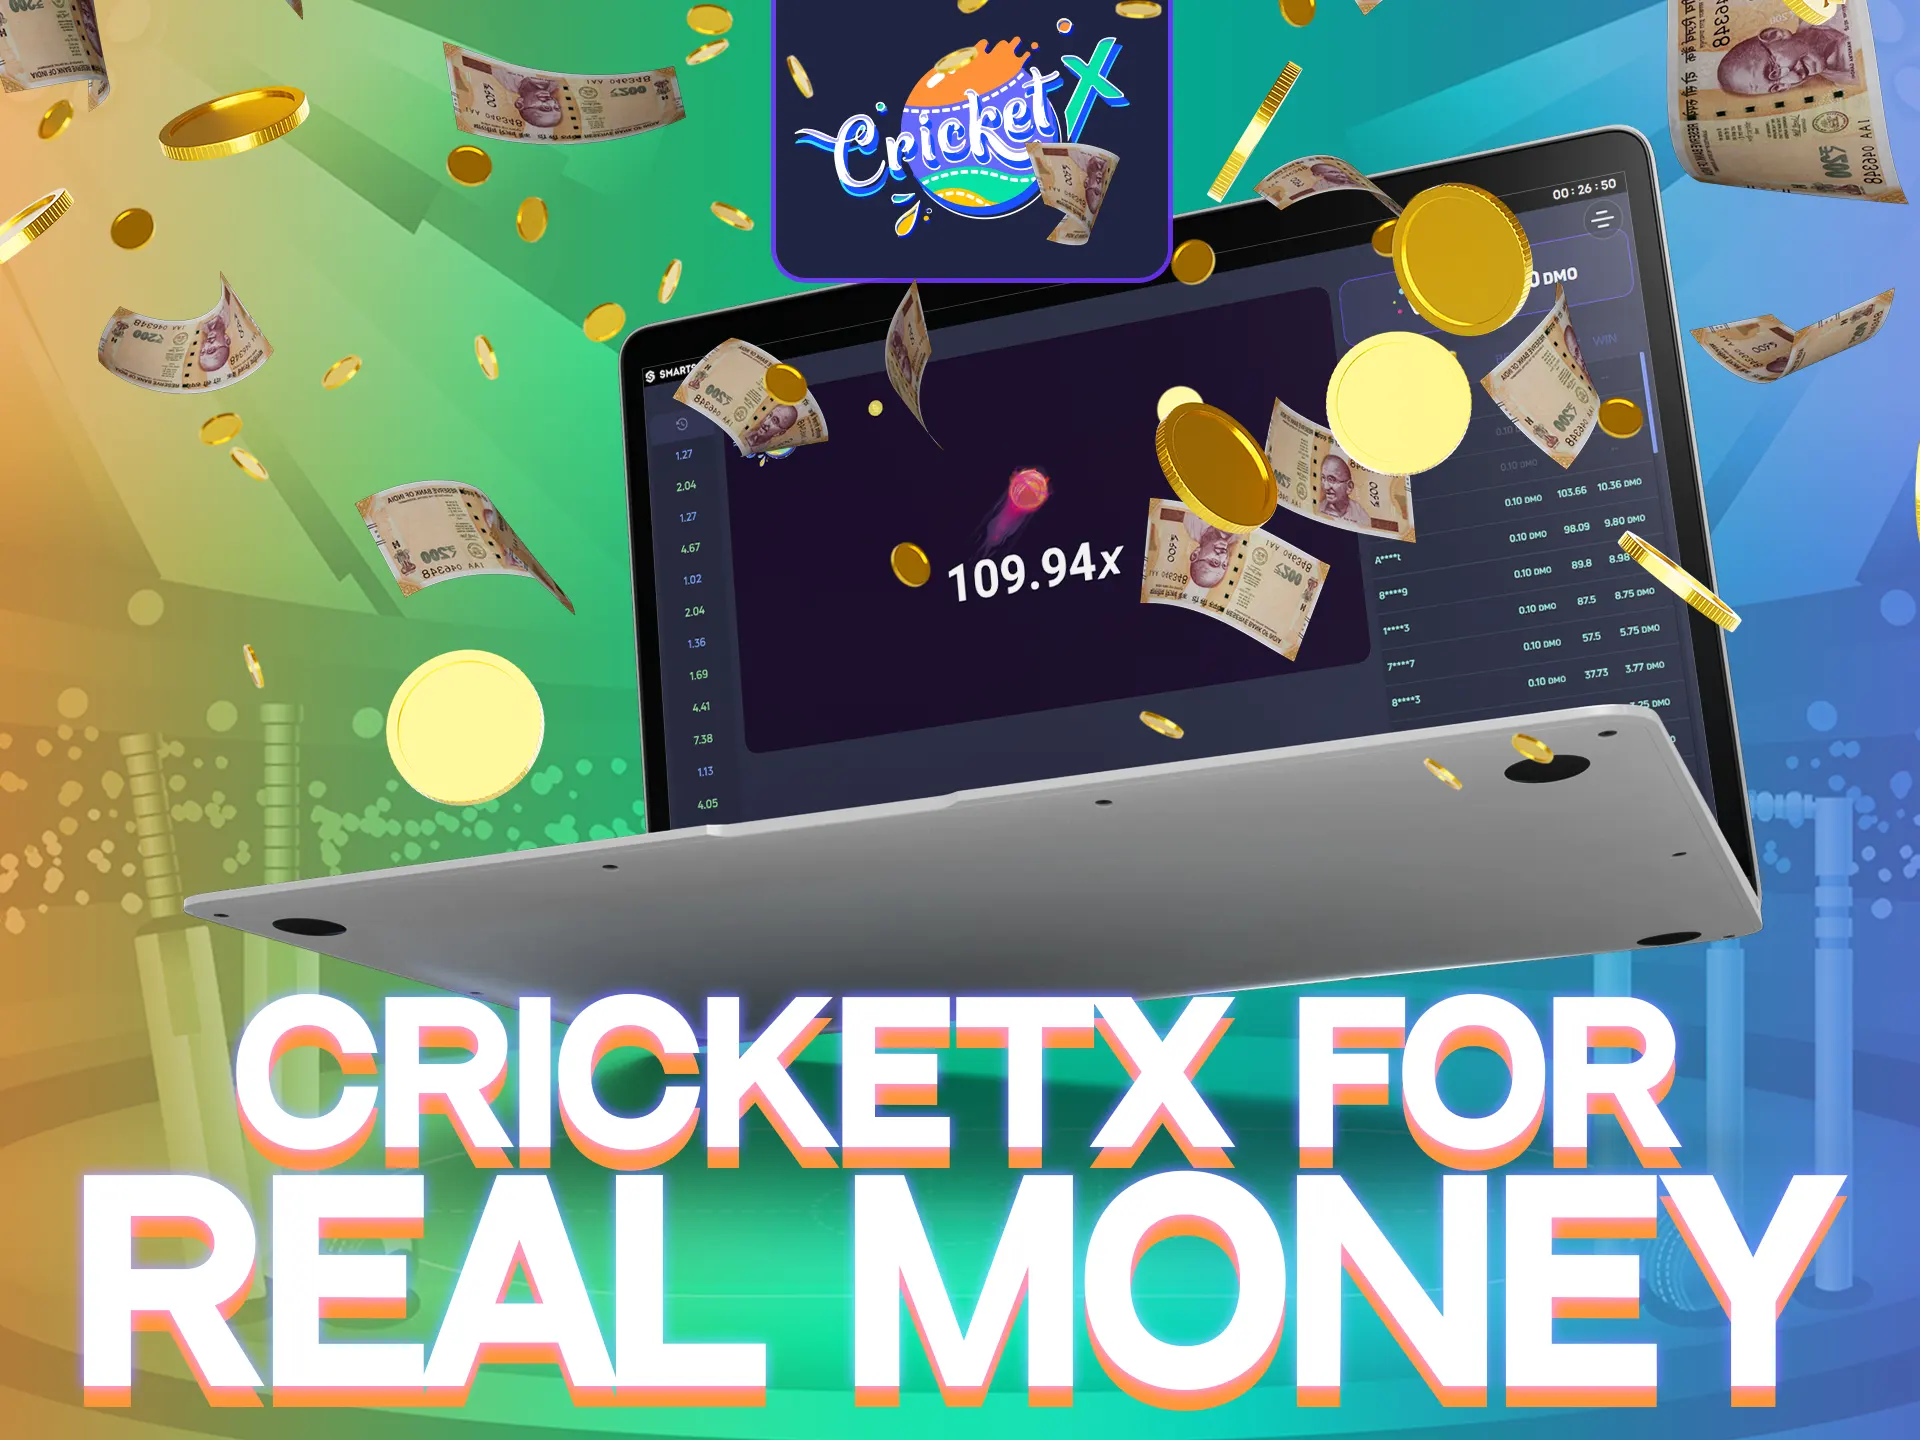 To play Cricket X for real money, verify your casino account with ID proofs.